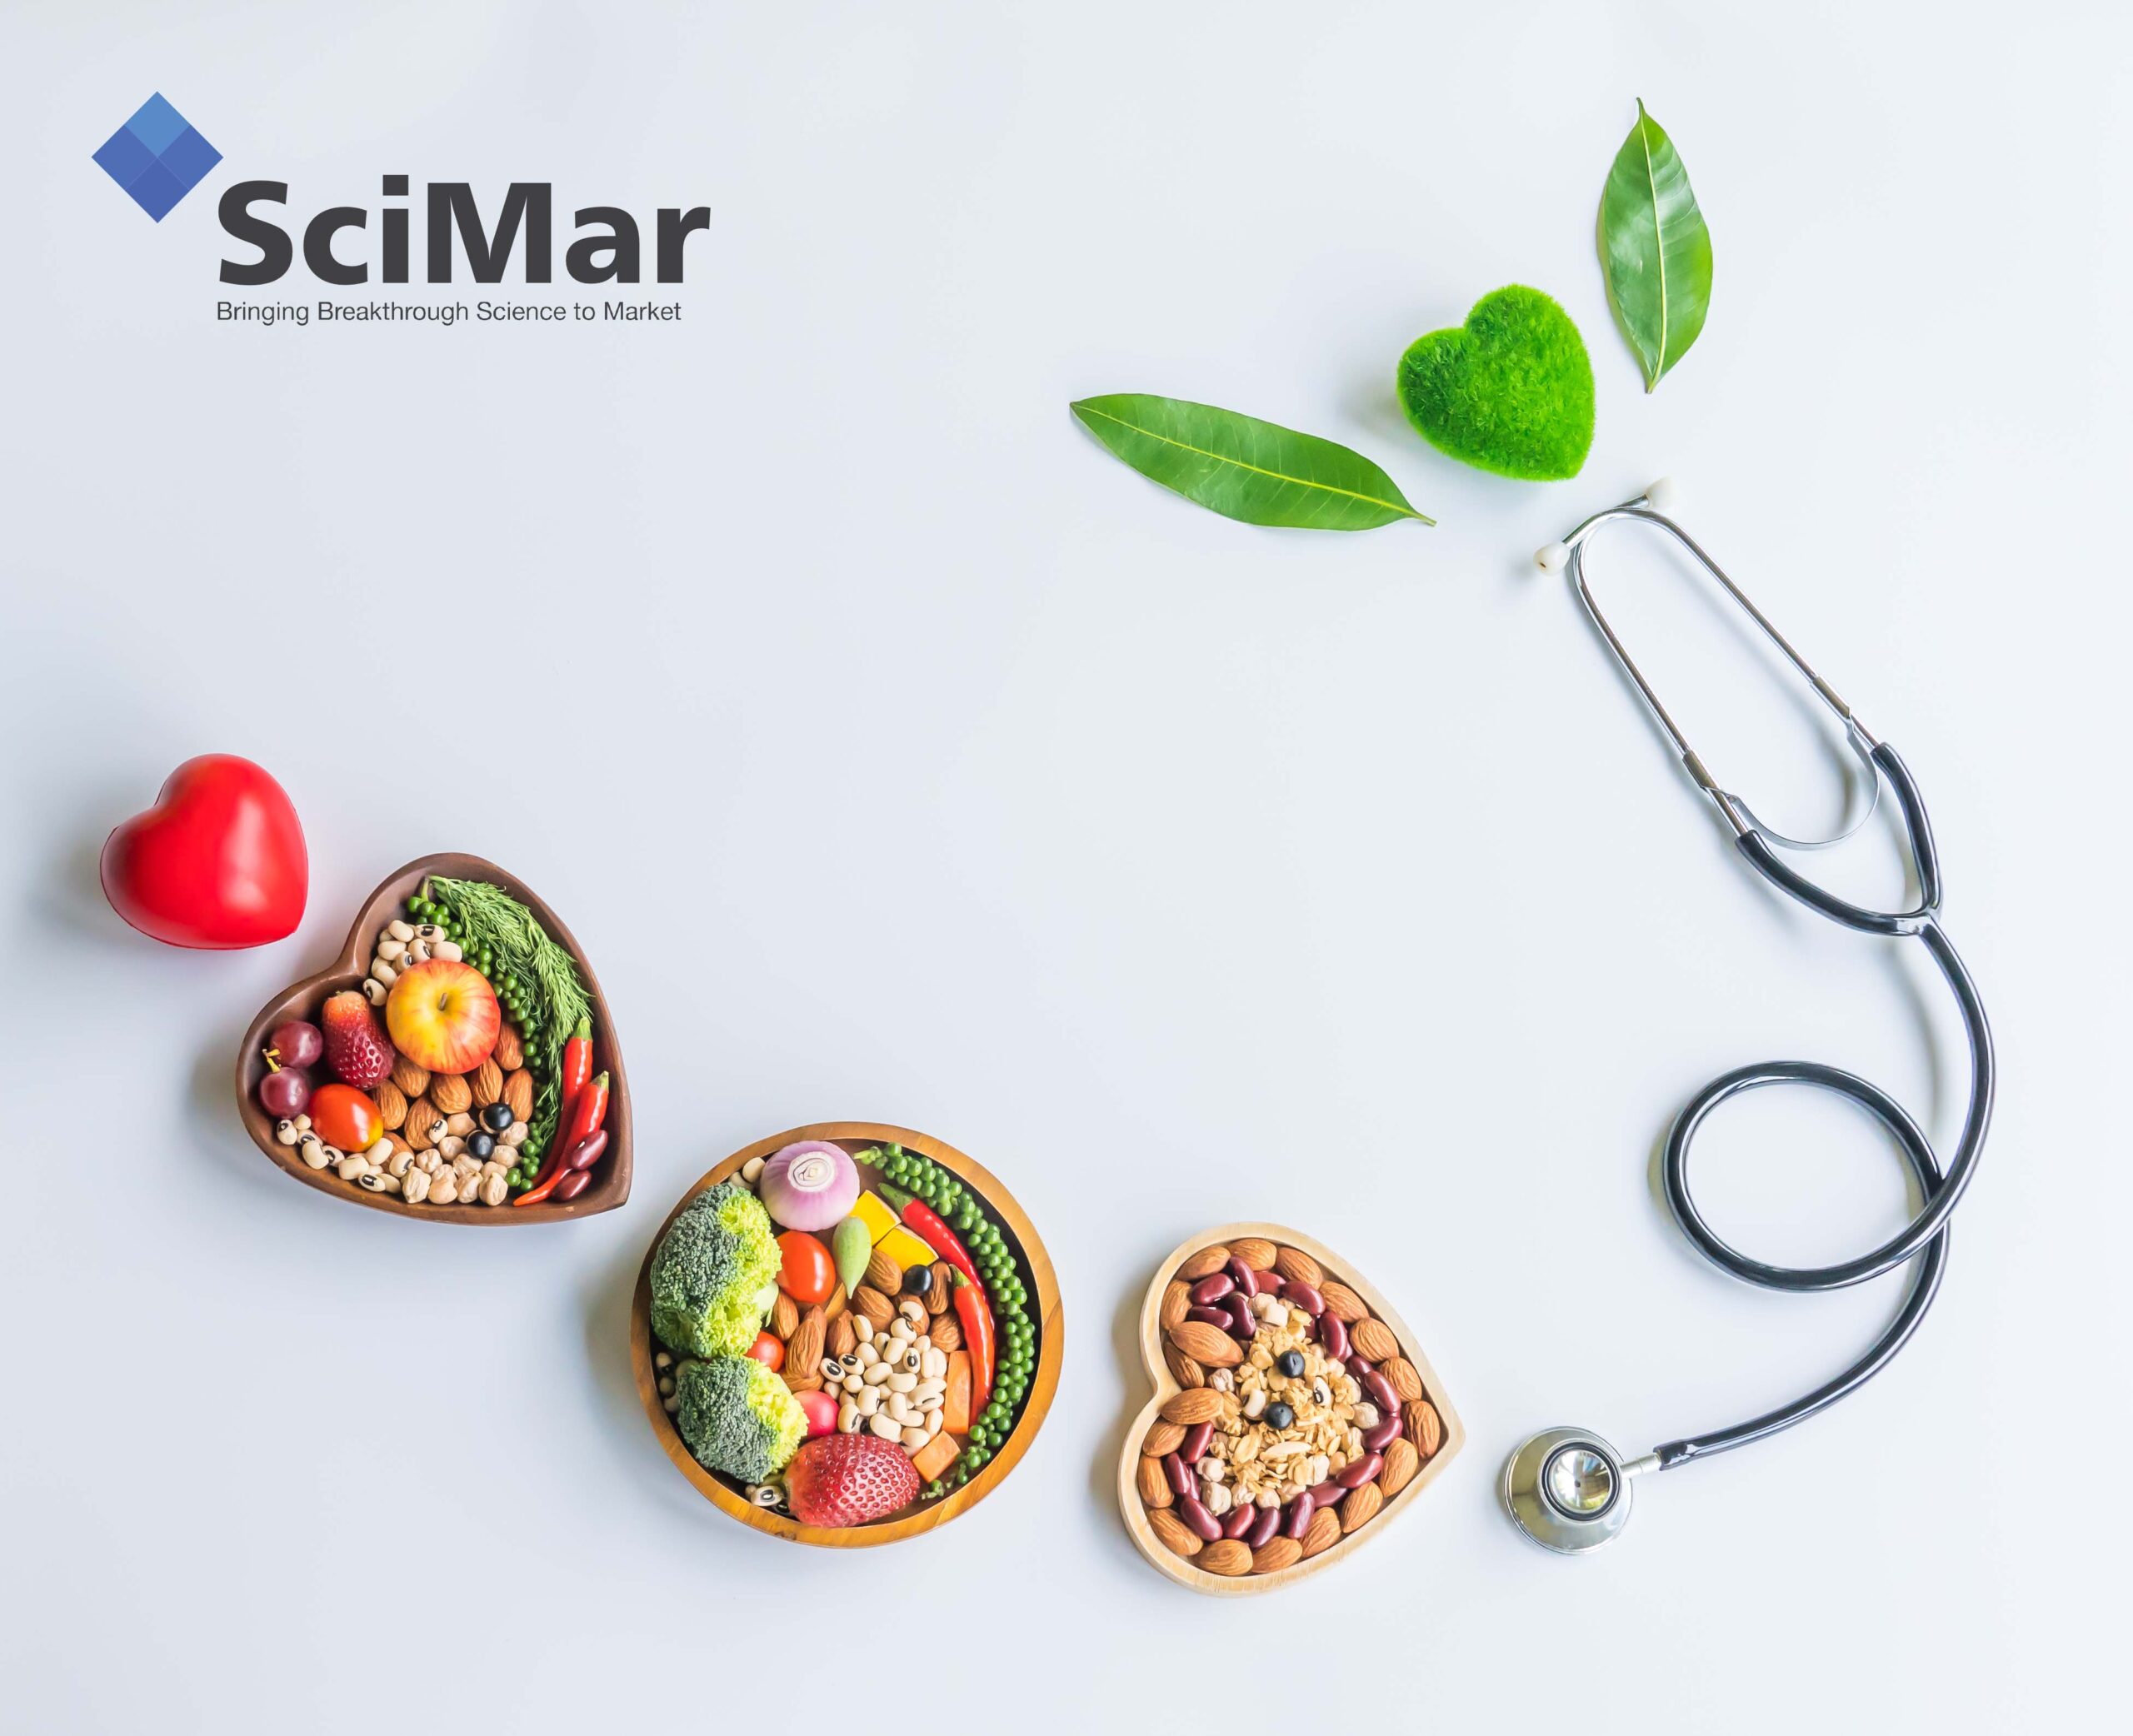 Photograph of the SciMar logo and some heart healthy elements